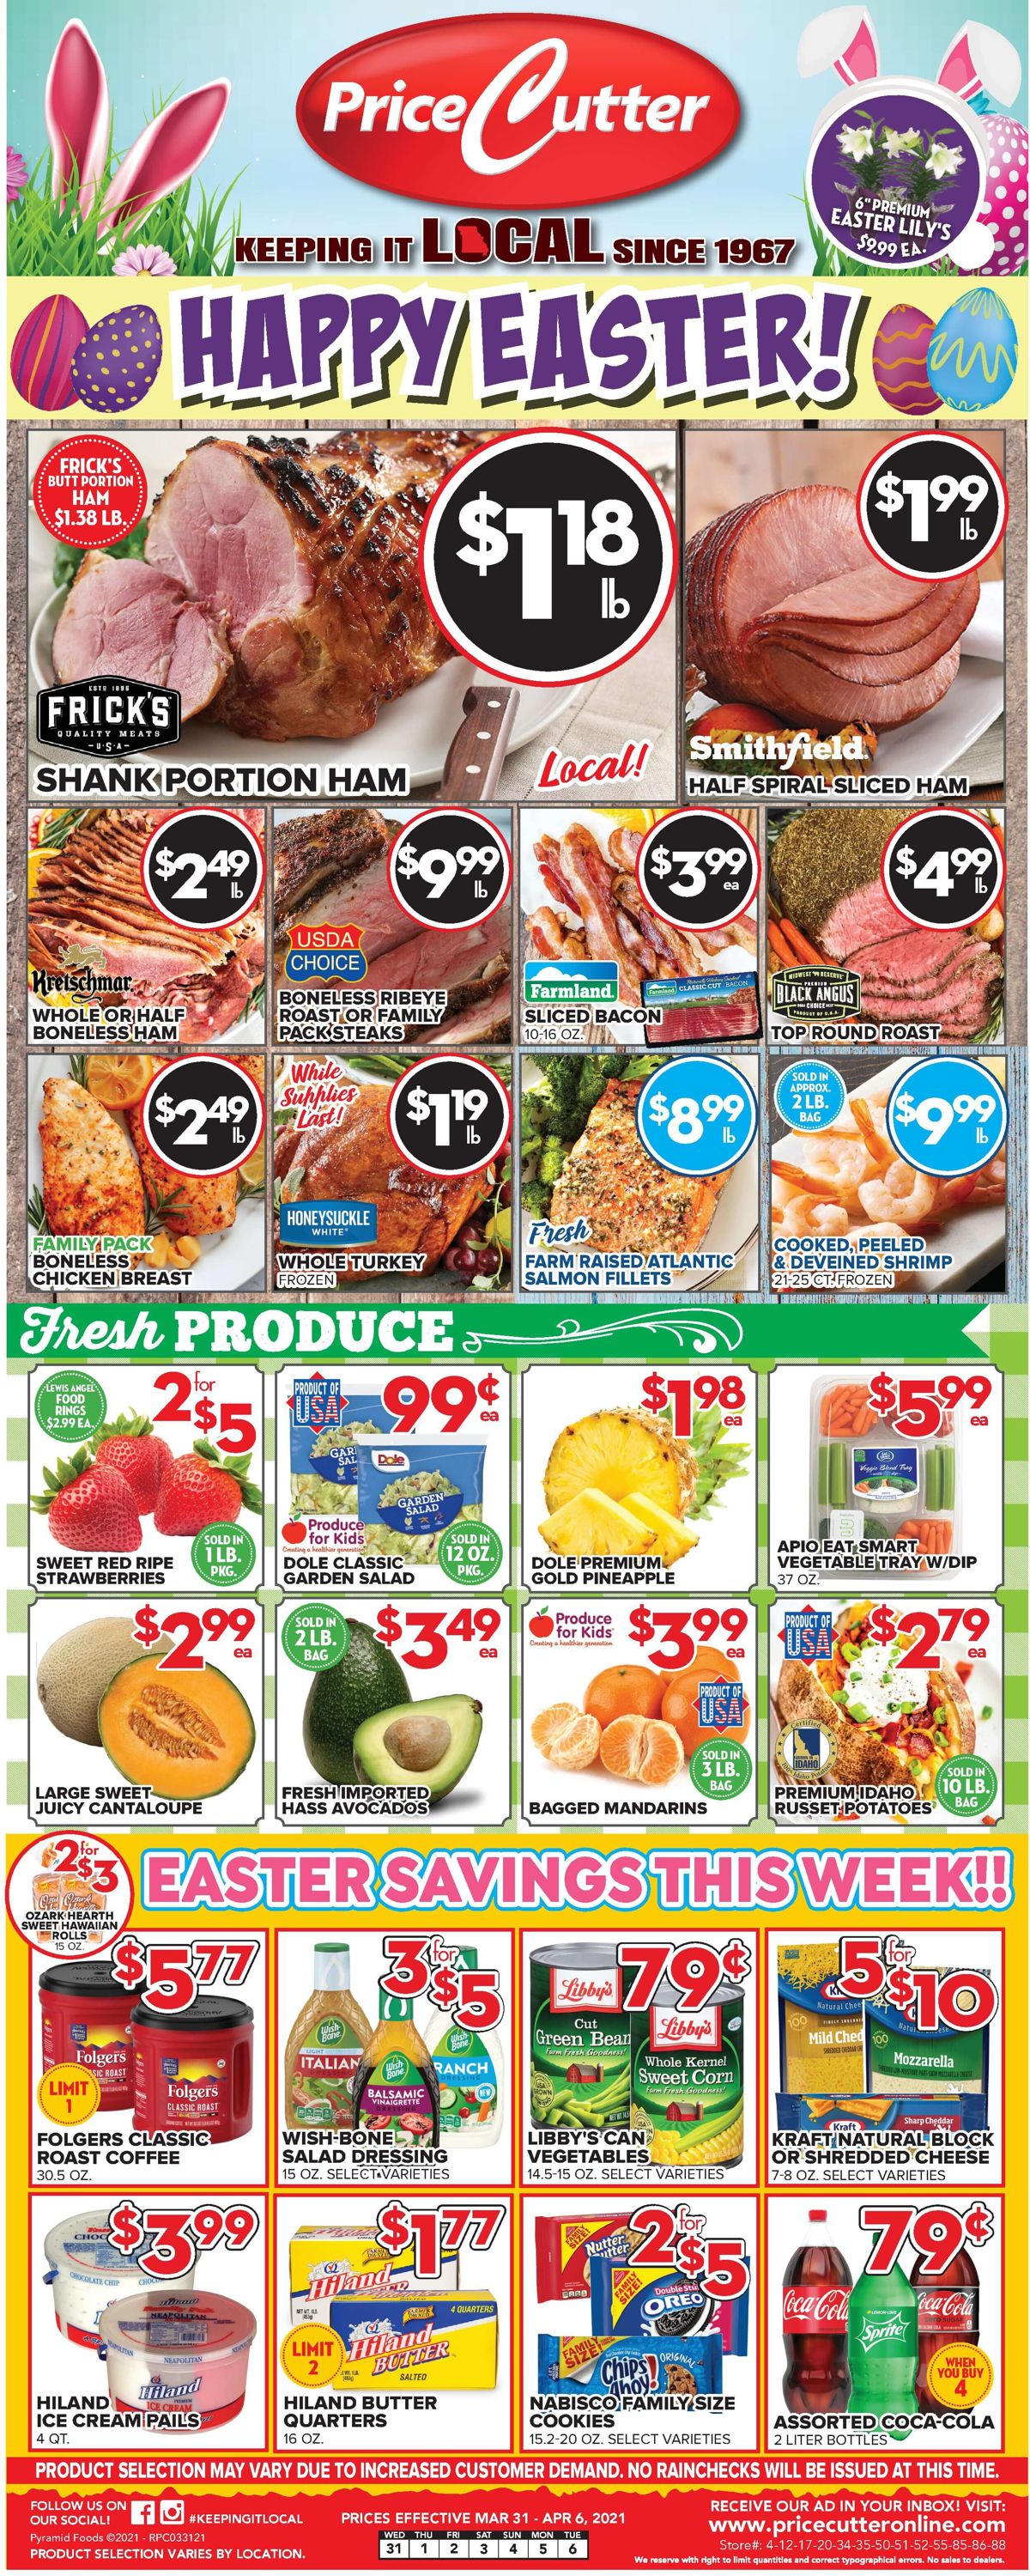 Price Cutter Easter 2021 Weekly Ad Circular - valid 03/31-04/06/2021